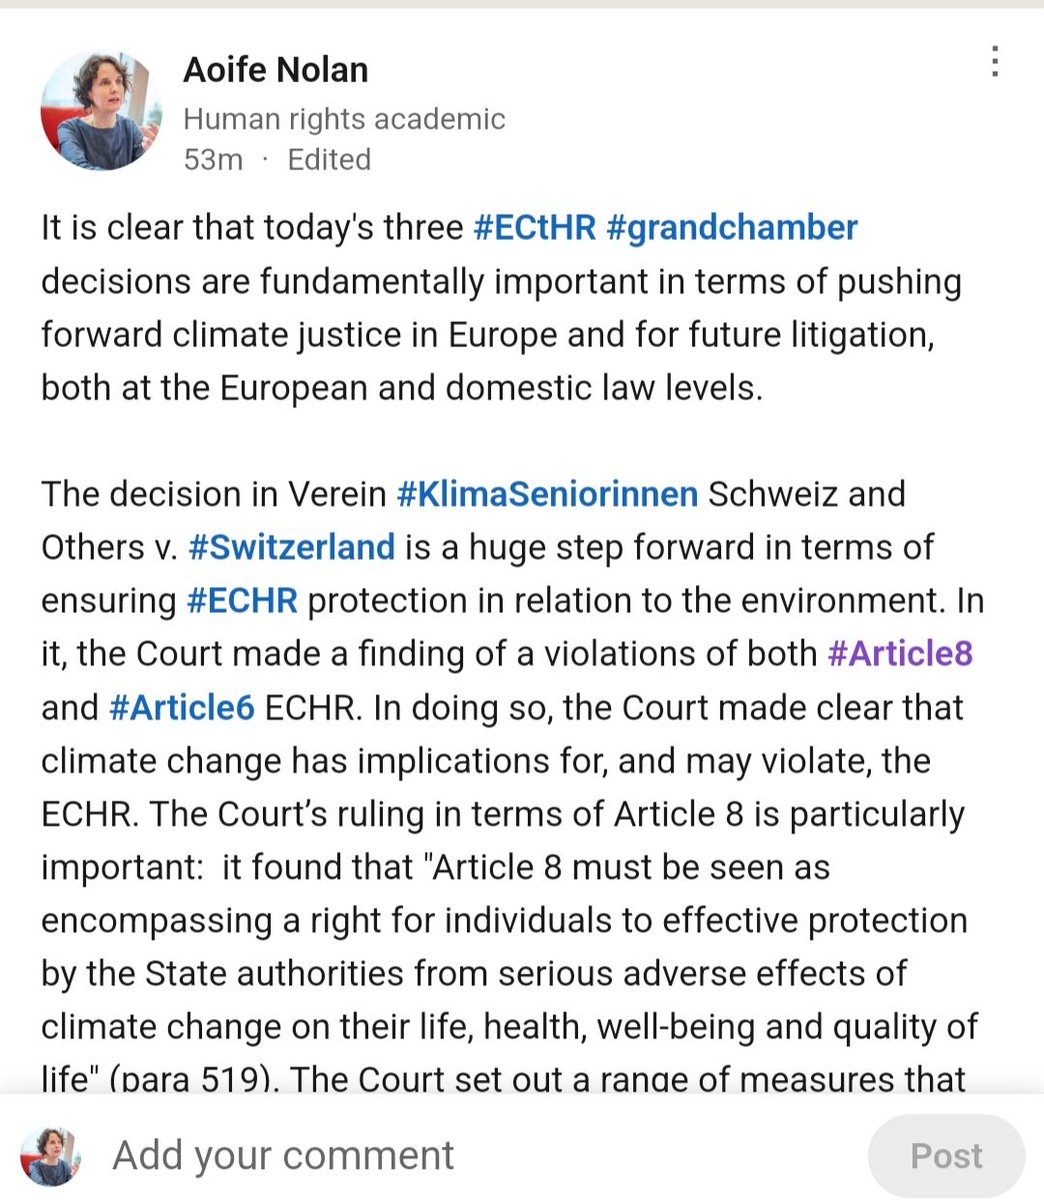 For initial thoughts on the @ECHR_CEDH #climatechange decisions delivered today, see @UoNHRLC @UoN_Law @commentator01 on Linkedin: linkedin.com/feed/update/ur… #climatejustice @UoN_Institute @UoNPressOffice